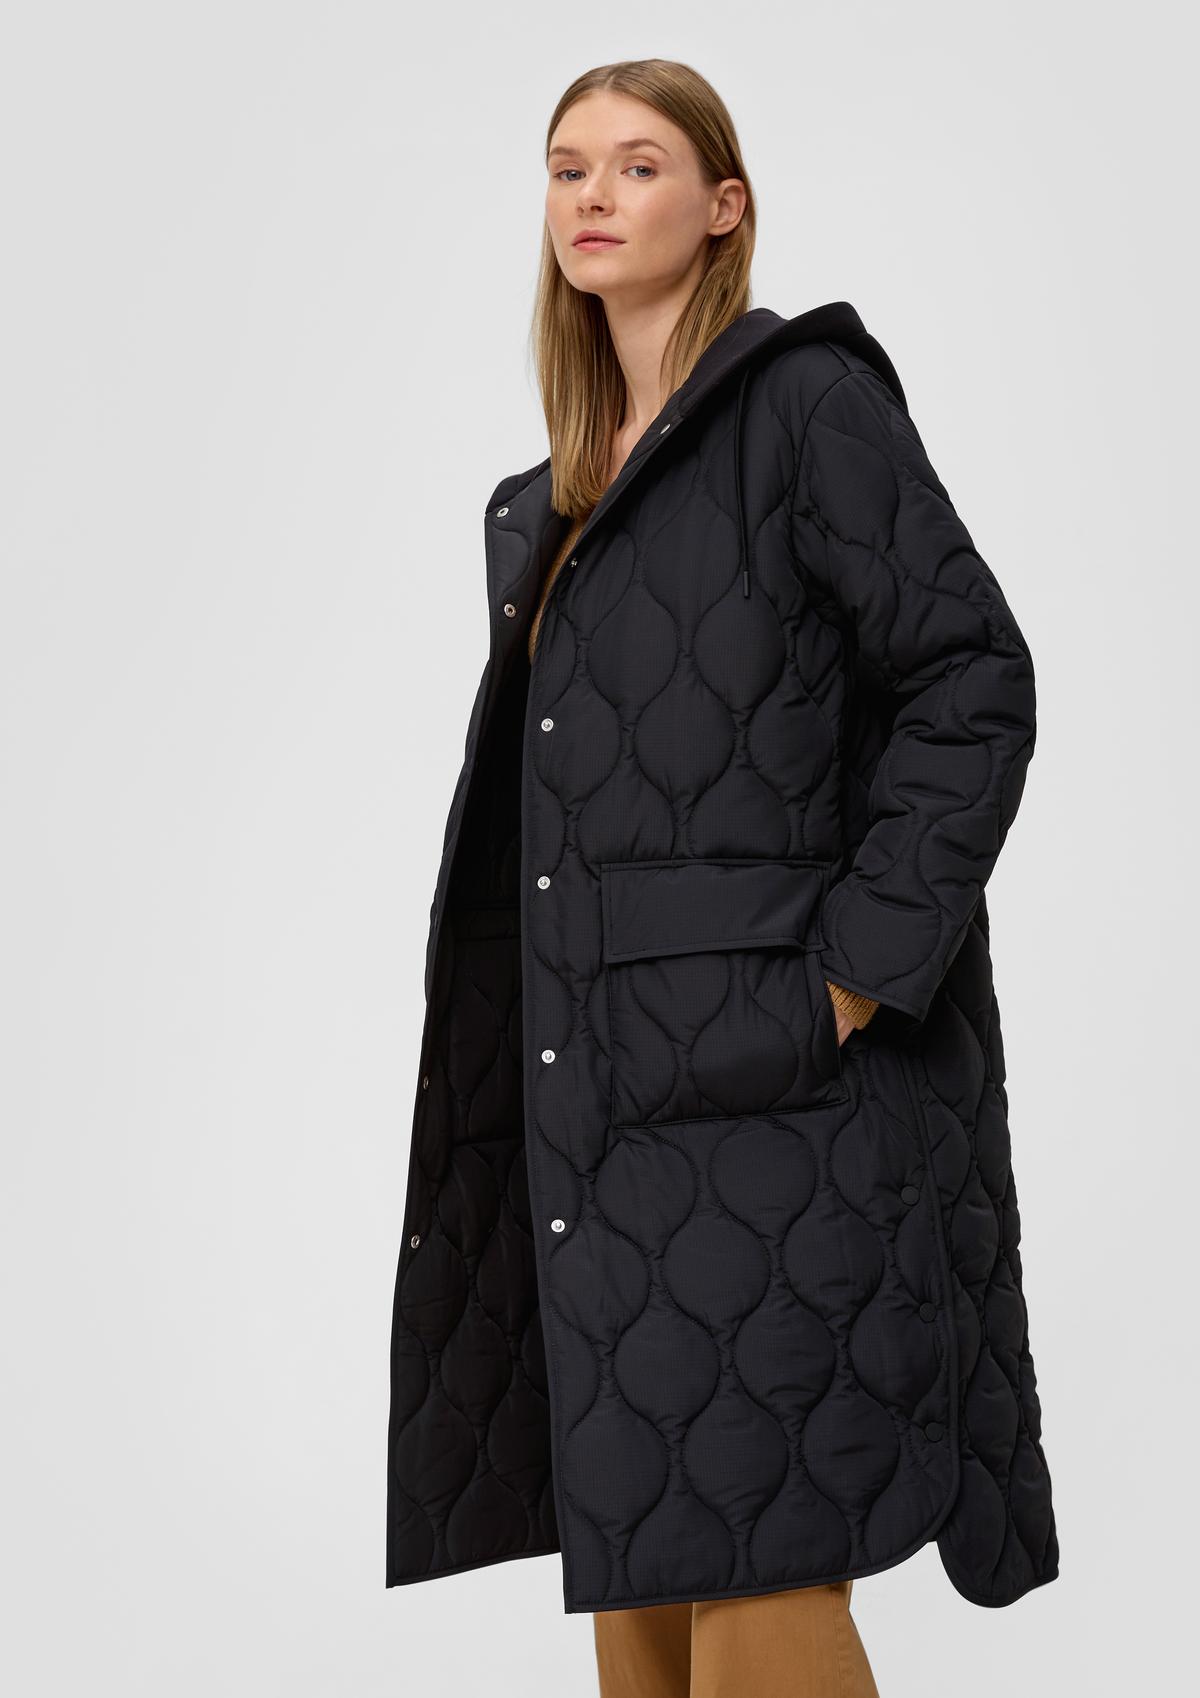 a of materials in mix olive Quilted coat -